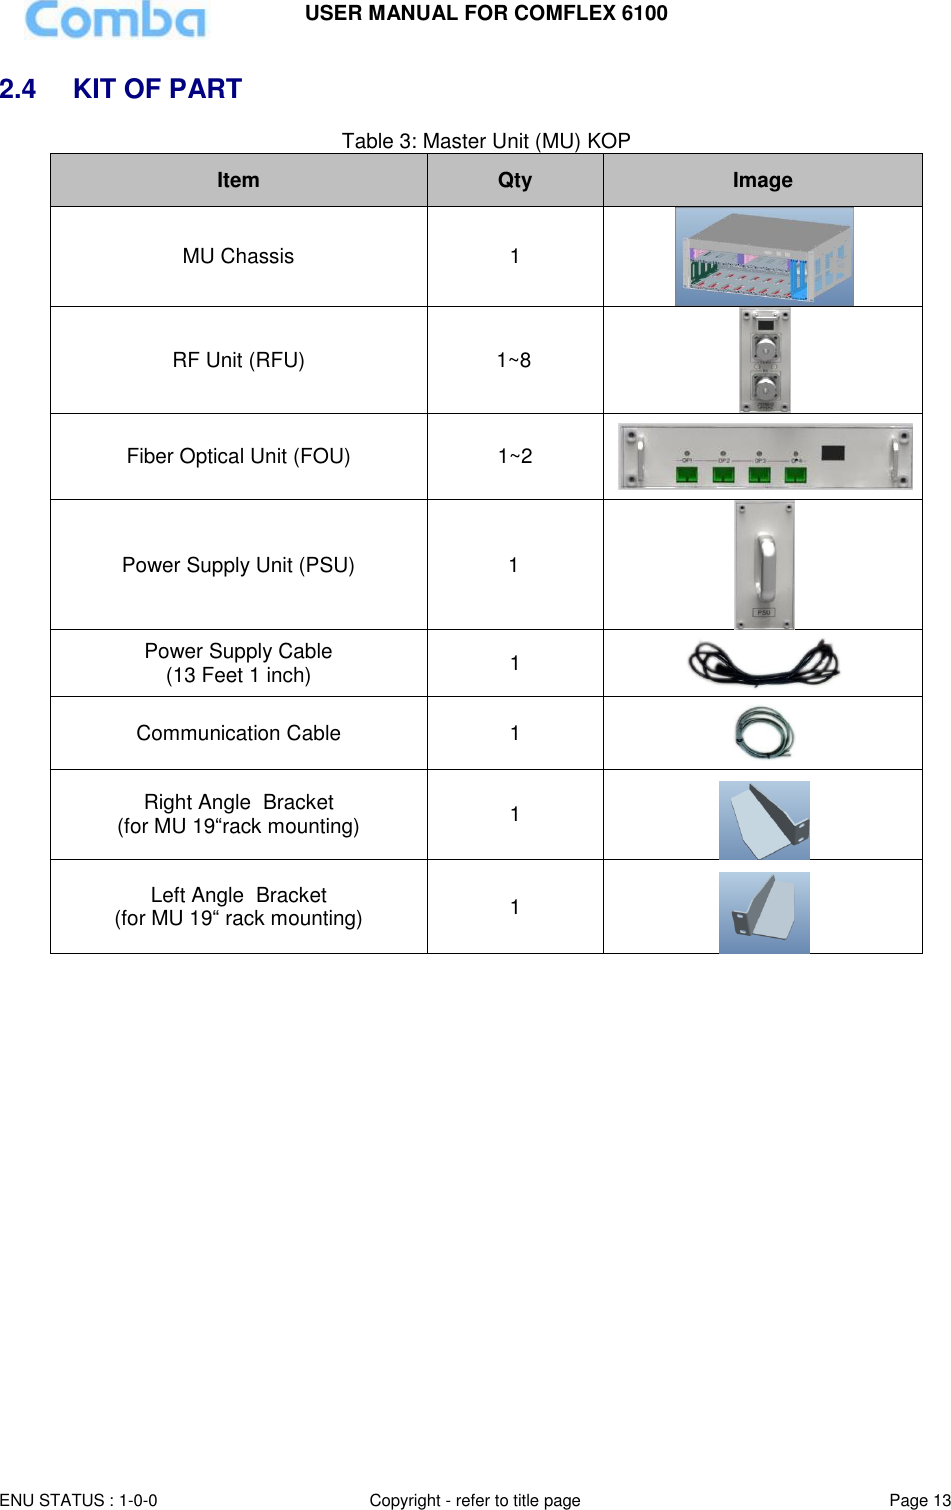 USER MANUAL FOR COMFLEX 6100 ENU STATUS : 1-0-0 Copyright - refer to title page Page 13  2.4 KIT OF PART Table 3: Master Unit (MU) KOP Item Qty Image MU Chassis 1  RF Unit (RFU) 1~8  Fiber Optical Unit (FOU) 1~2  Power Supply Unit (PSU) 1  Power Supply Cable (13 Feet 1 inch) 1  Communication Cable 1  Right Angle  Bracket (for MU 19“rack mounting) 1   Left Angle  Bracket (for MU 19“ rack mounting) 1    